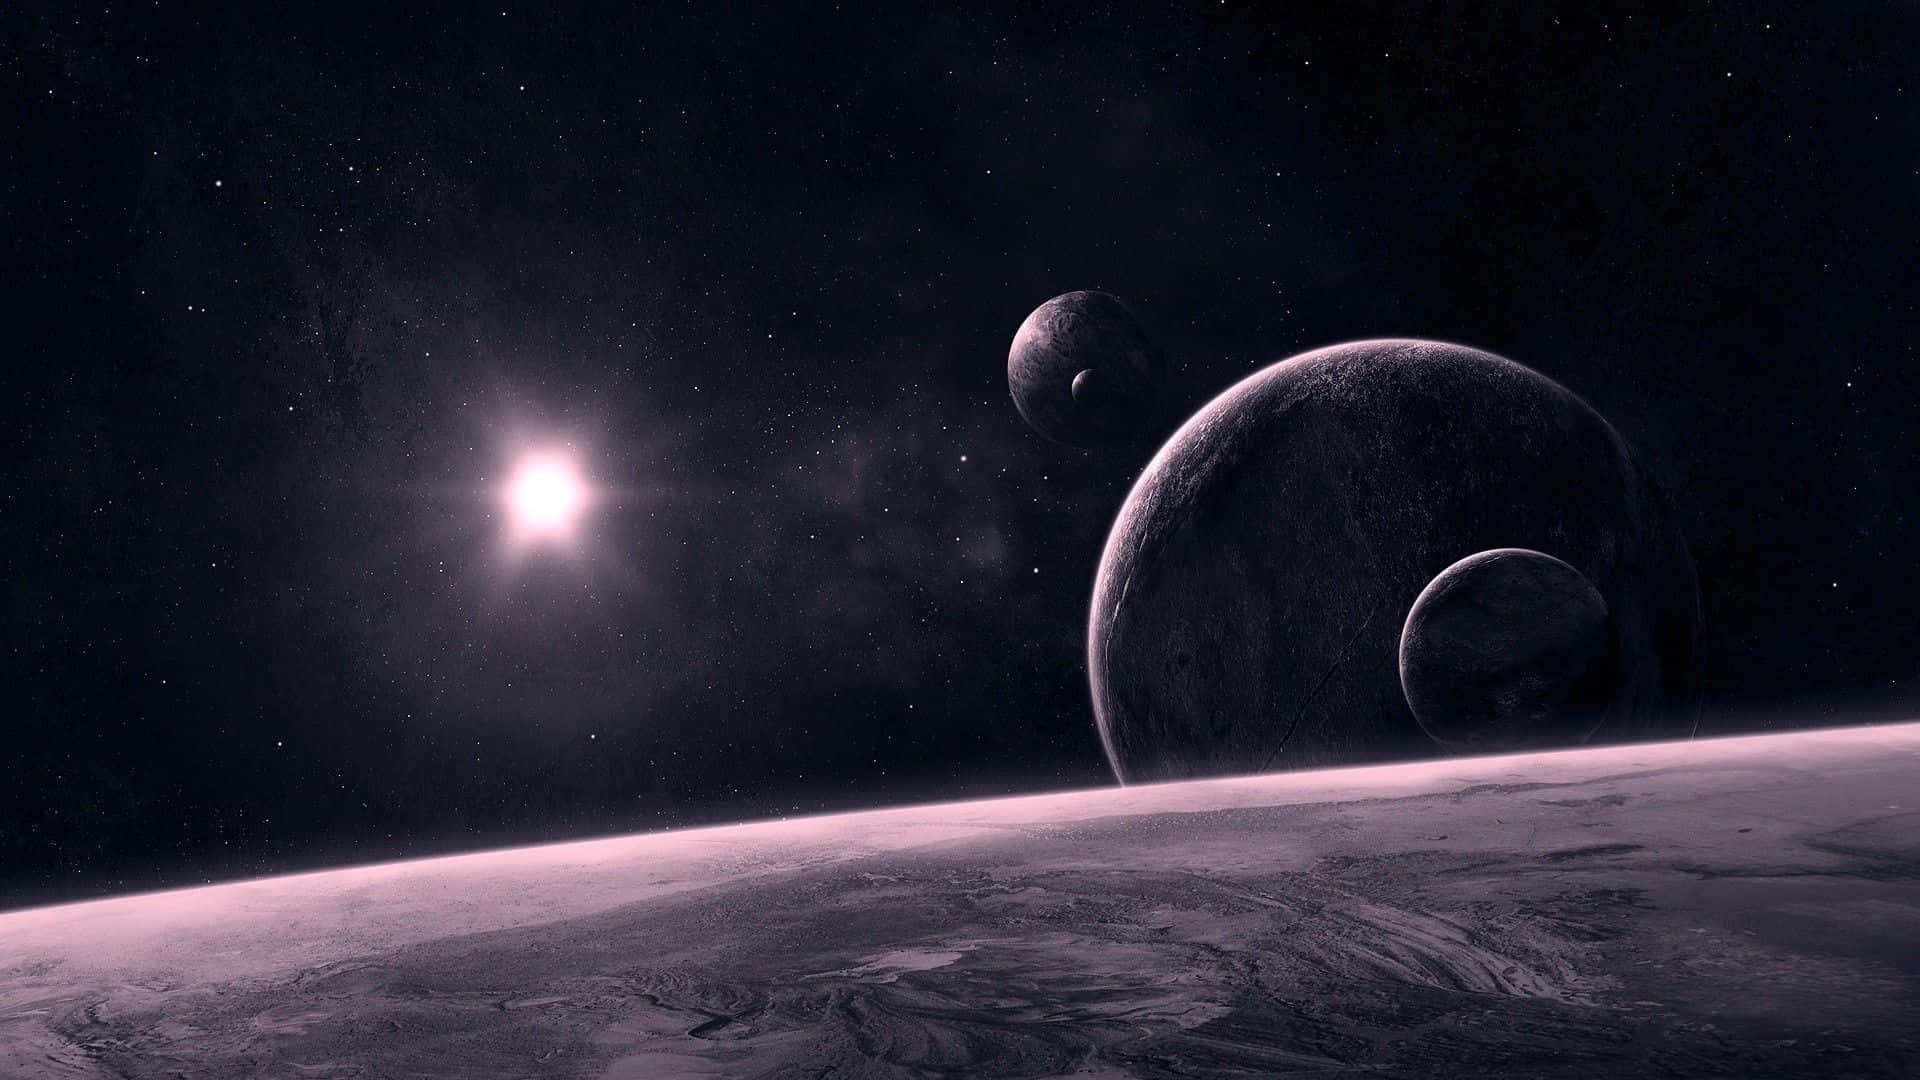 Monochrome Planets Celestial Objects Background